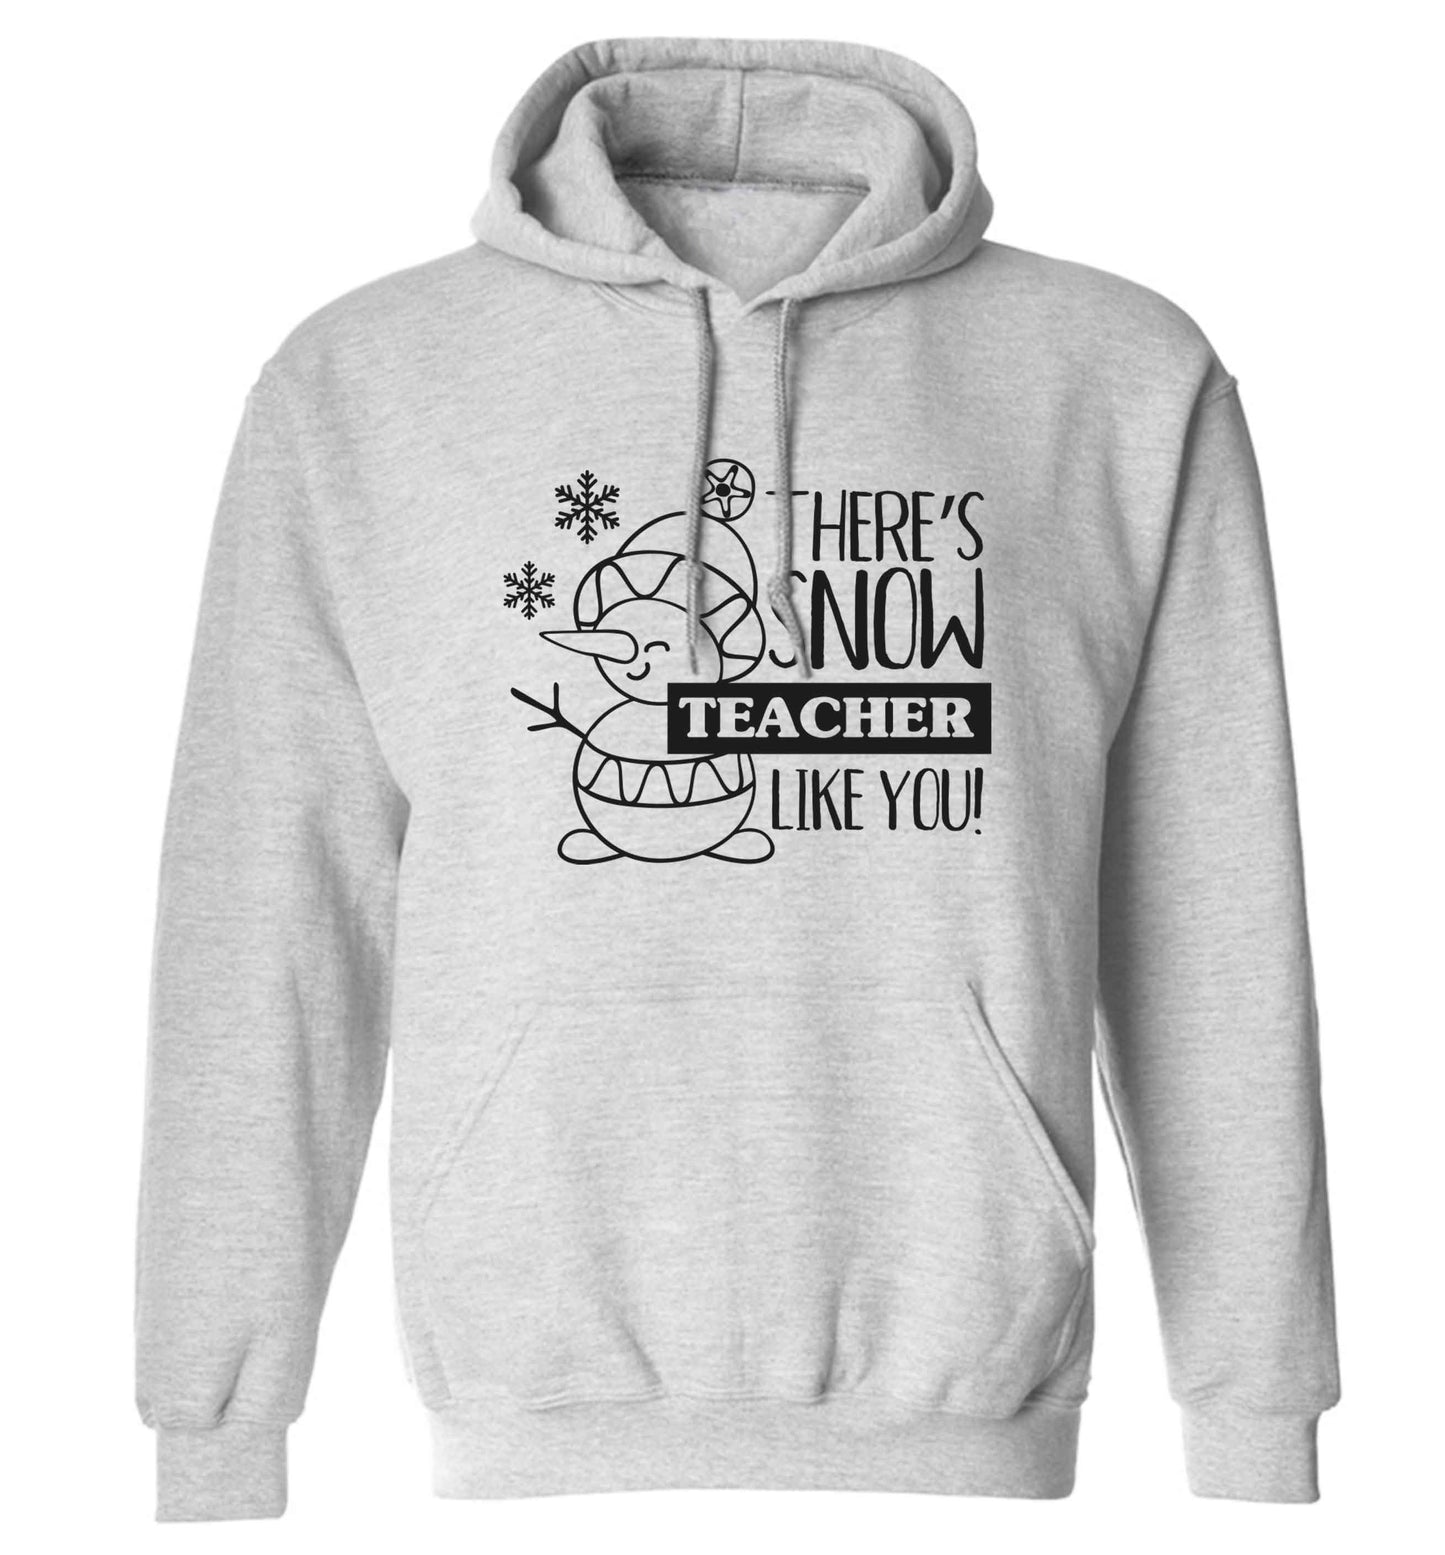 There's snow teacher like you adults unisex grey hoodie 2XL